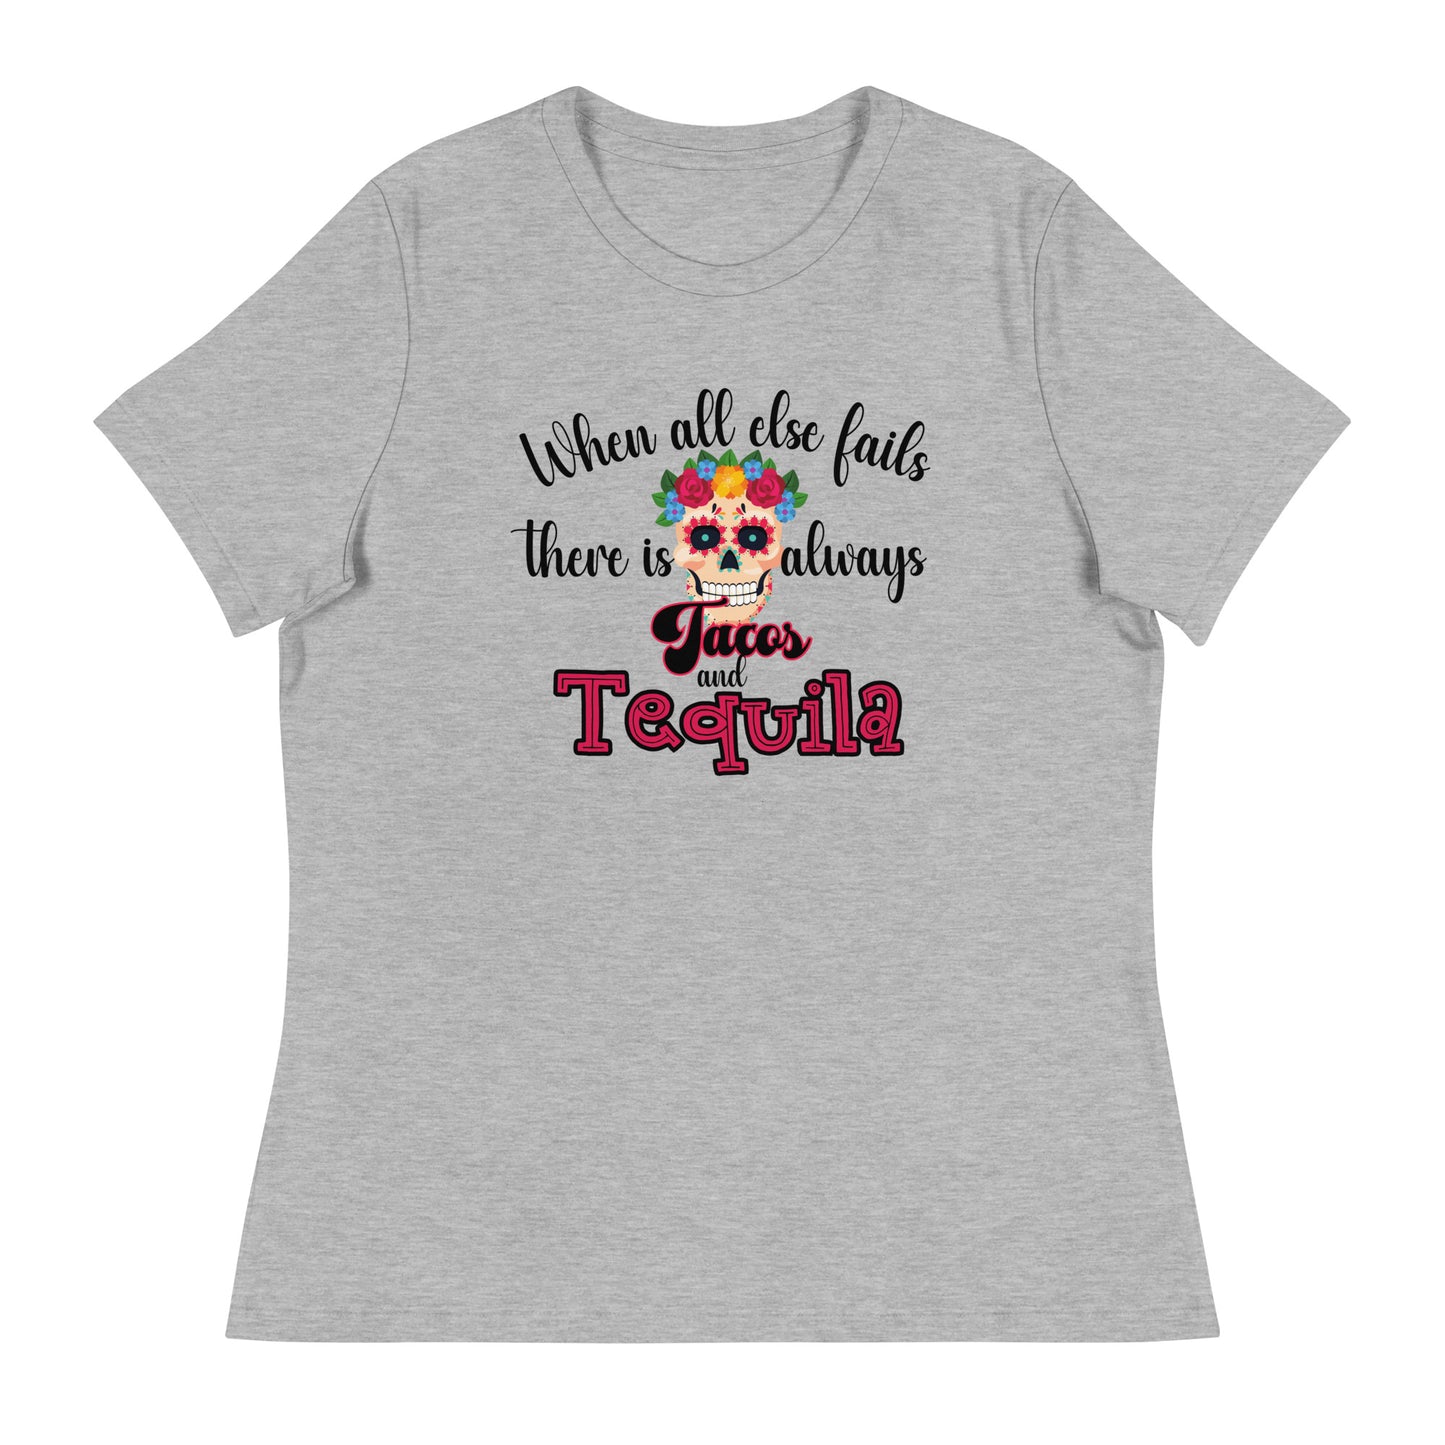 When all else fails there is always tacos and tequila Women's Tee Shirt